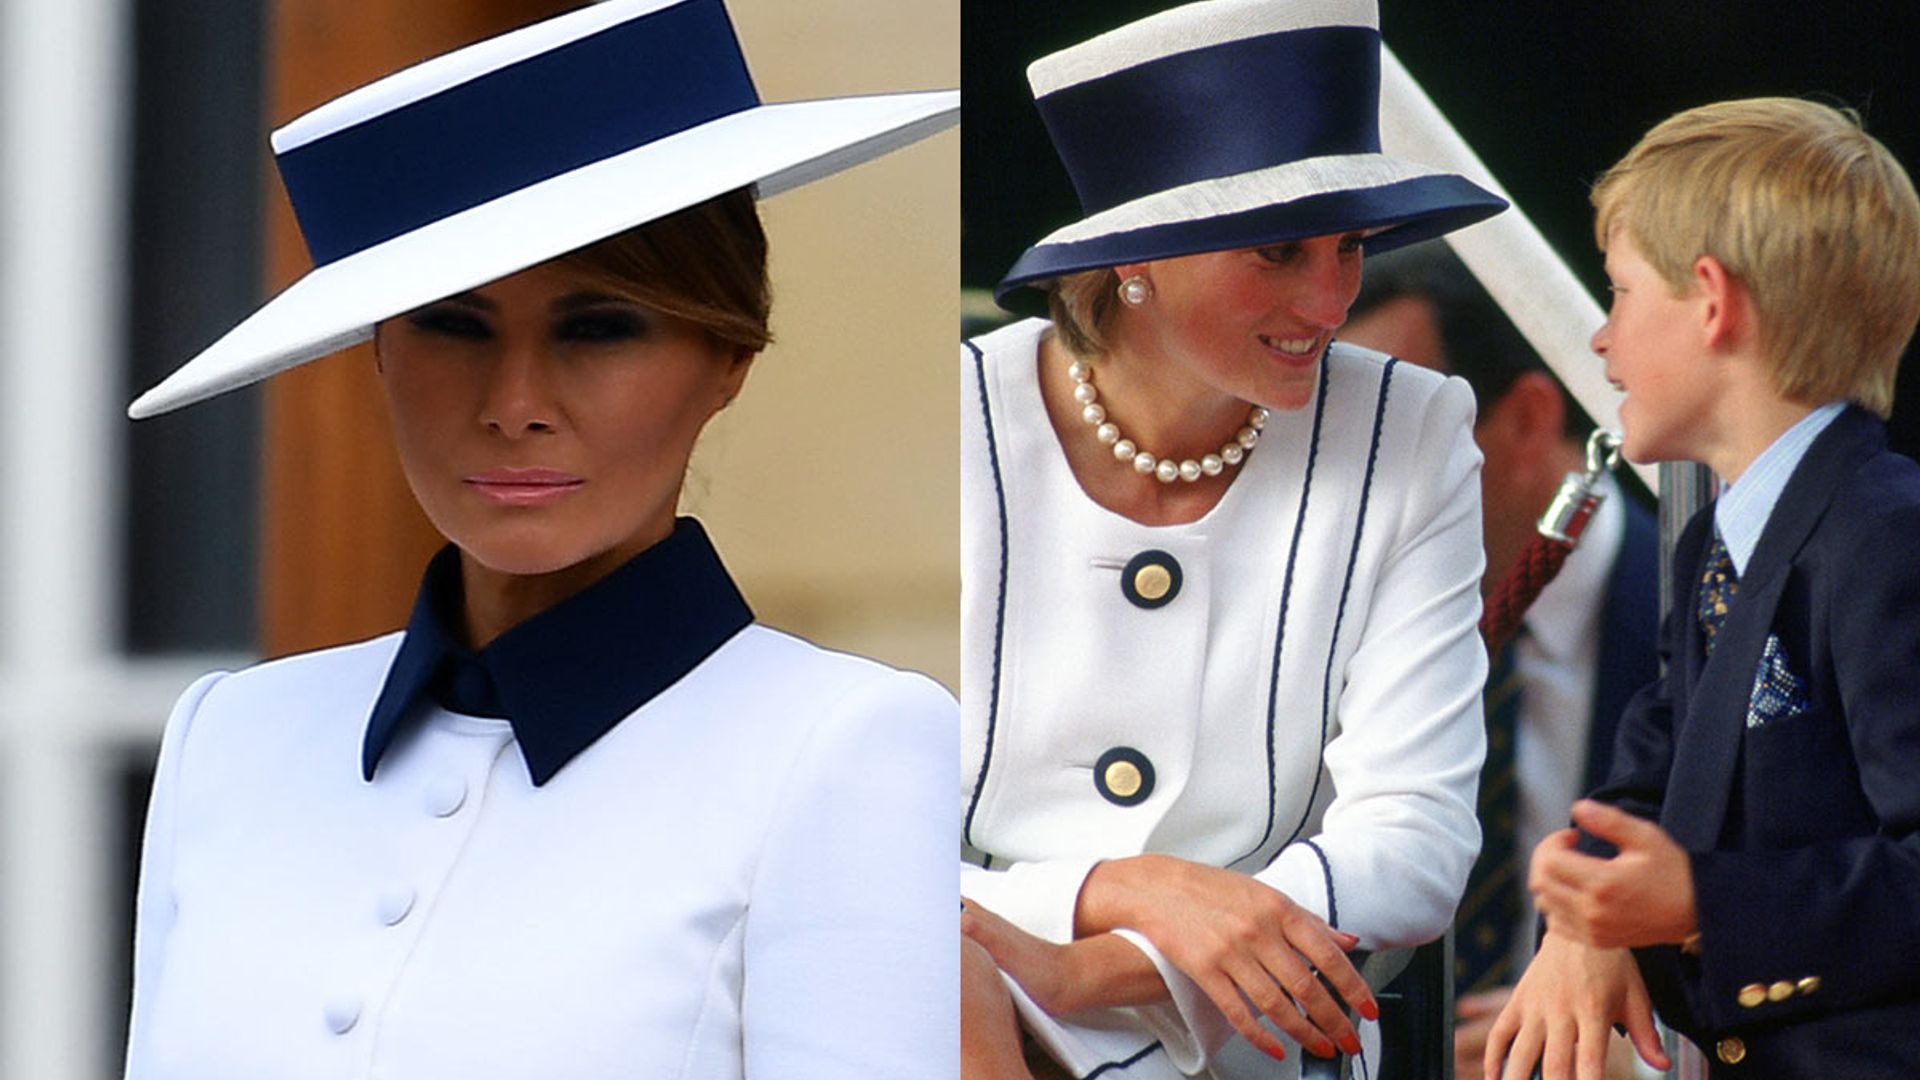 Was Melania Trump inspired by Princess Diana for her visit to Buckingham Palace?